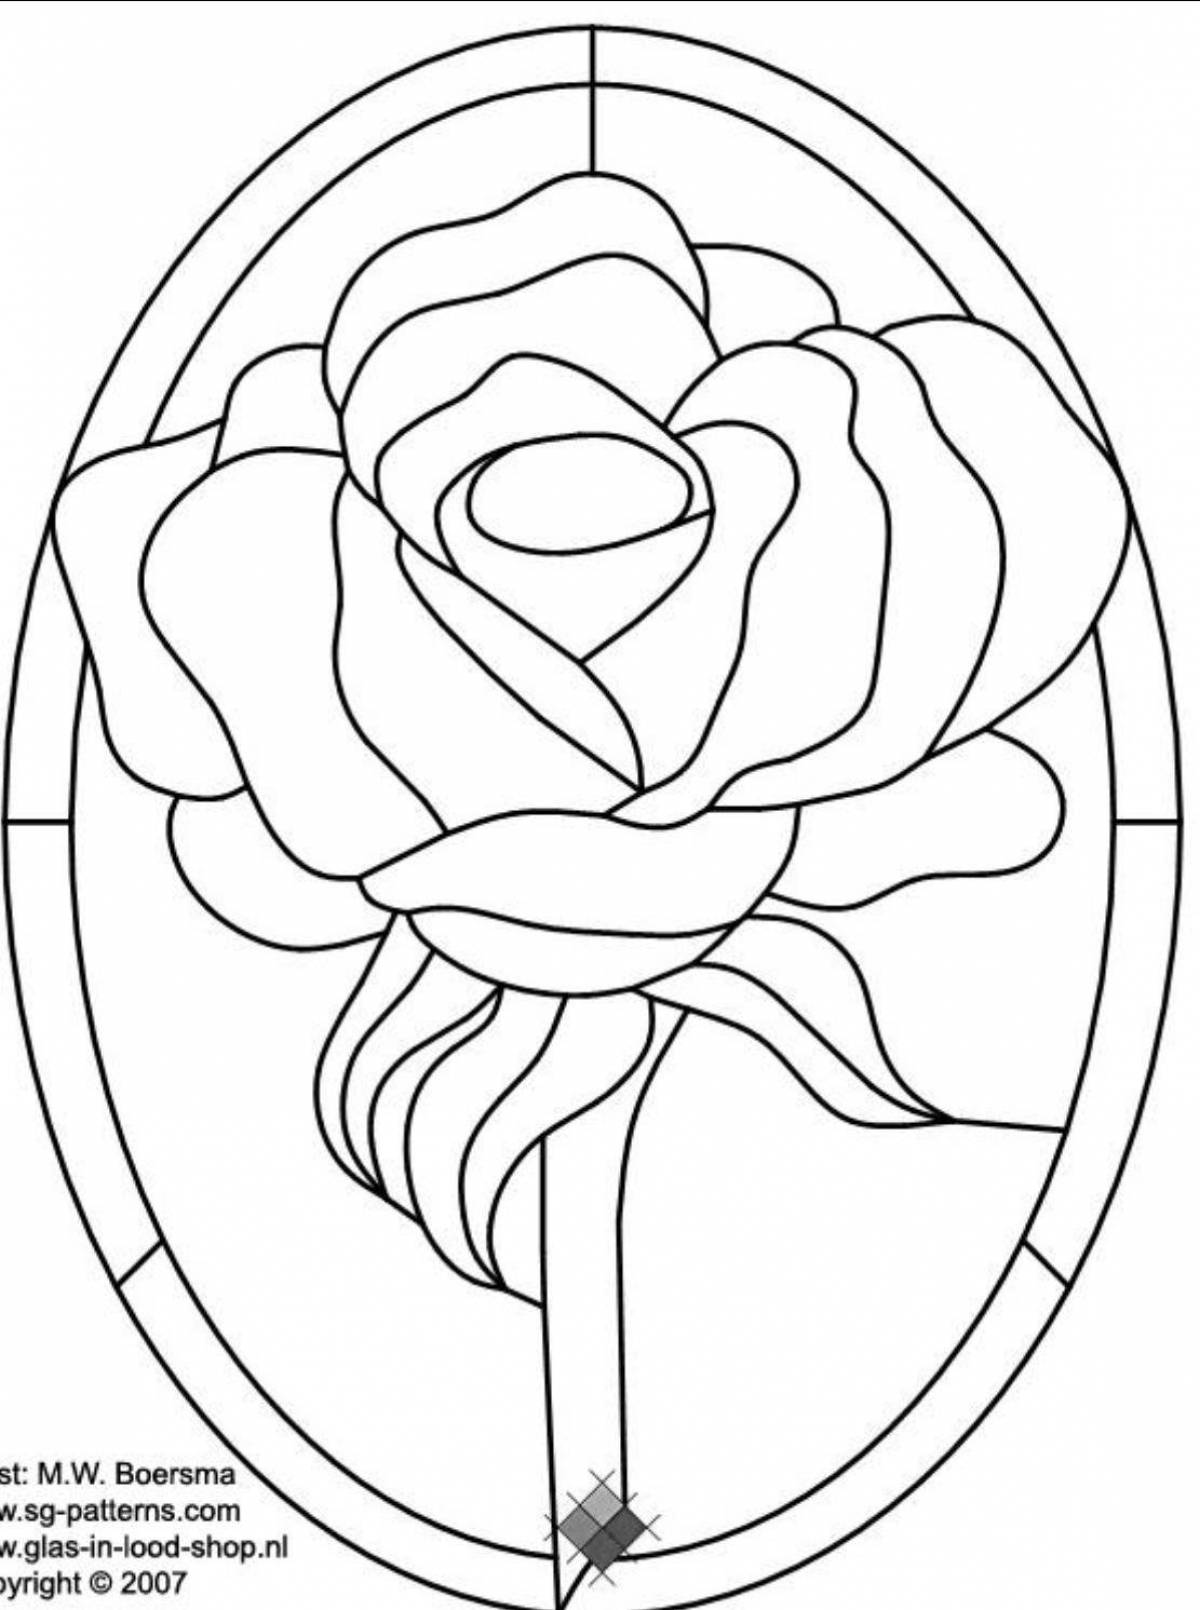 Adorable stained glass coloring book